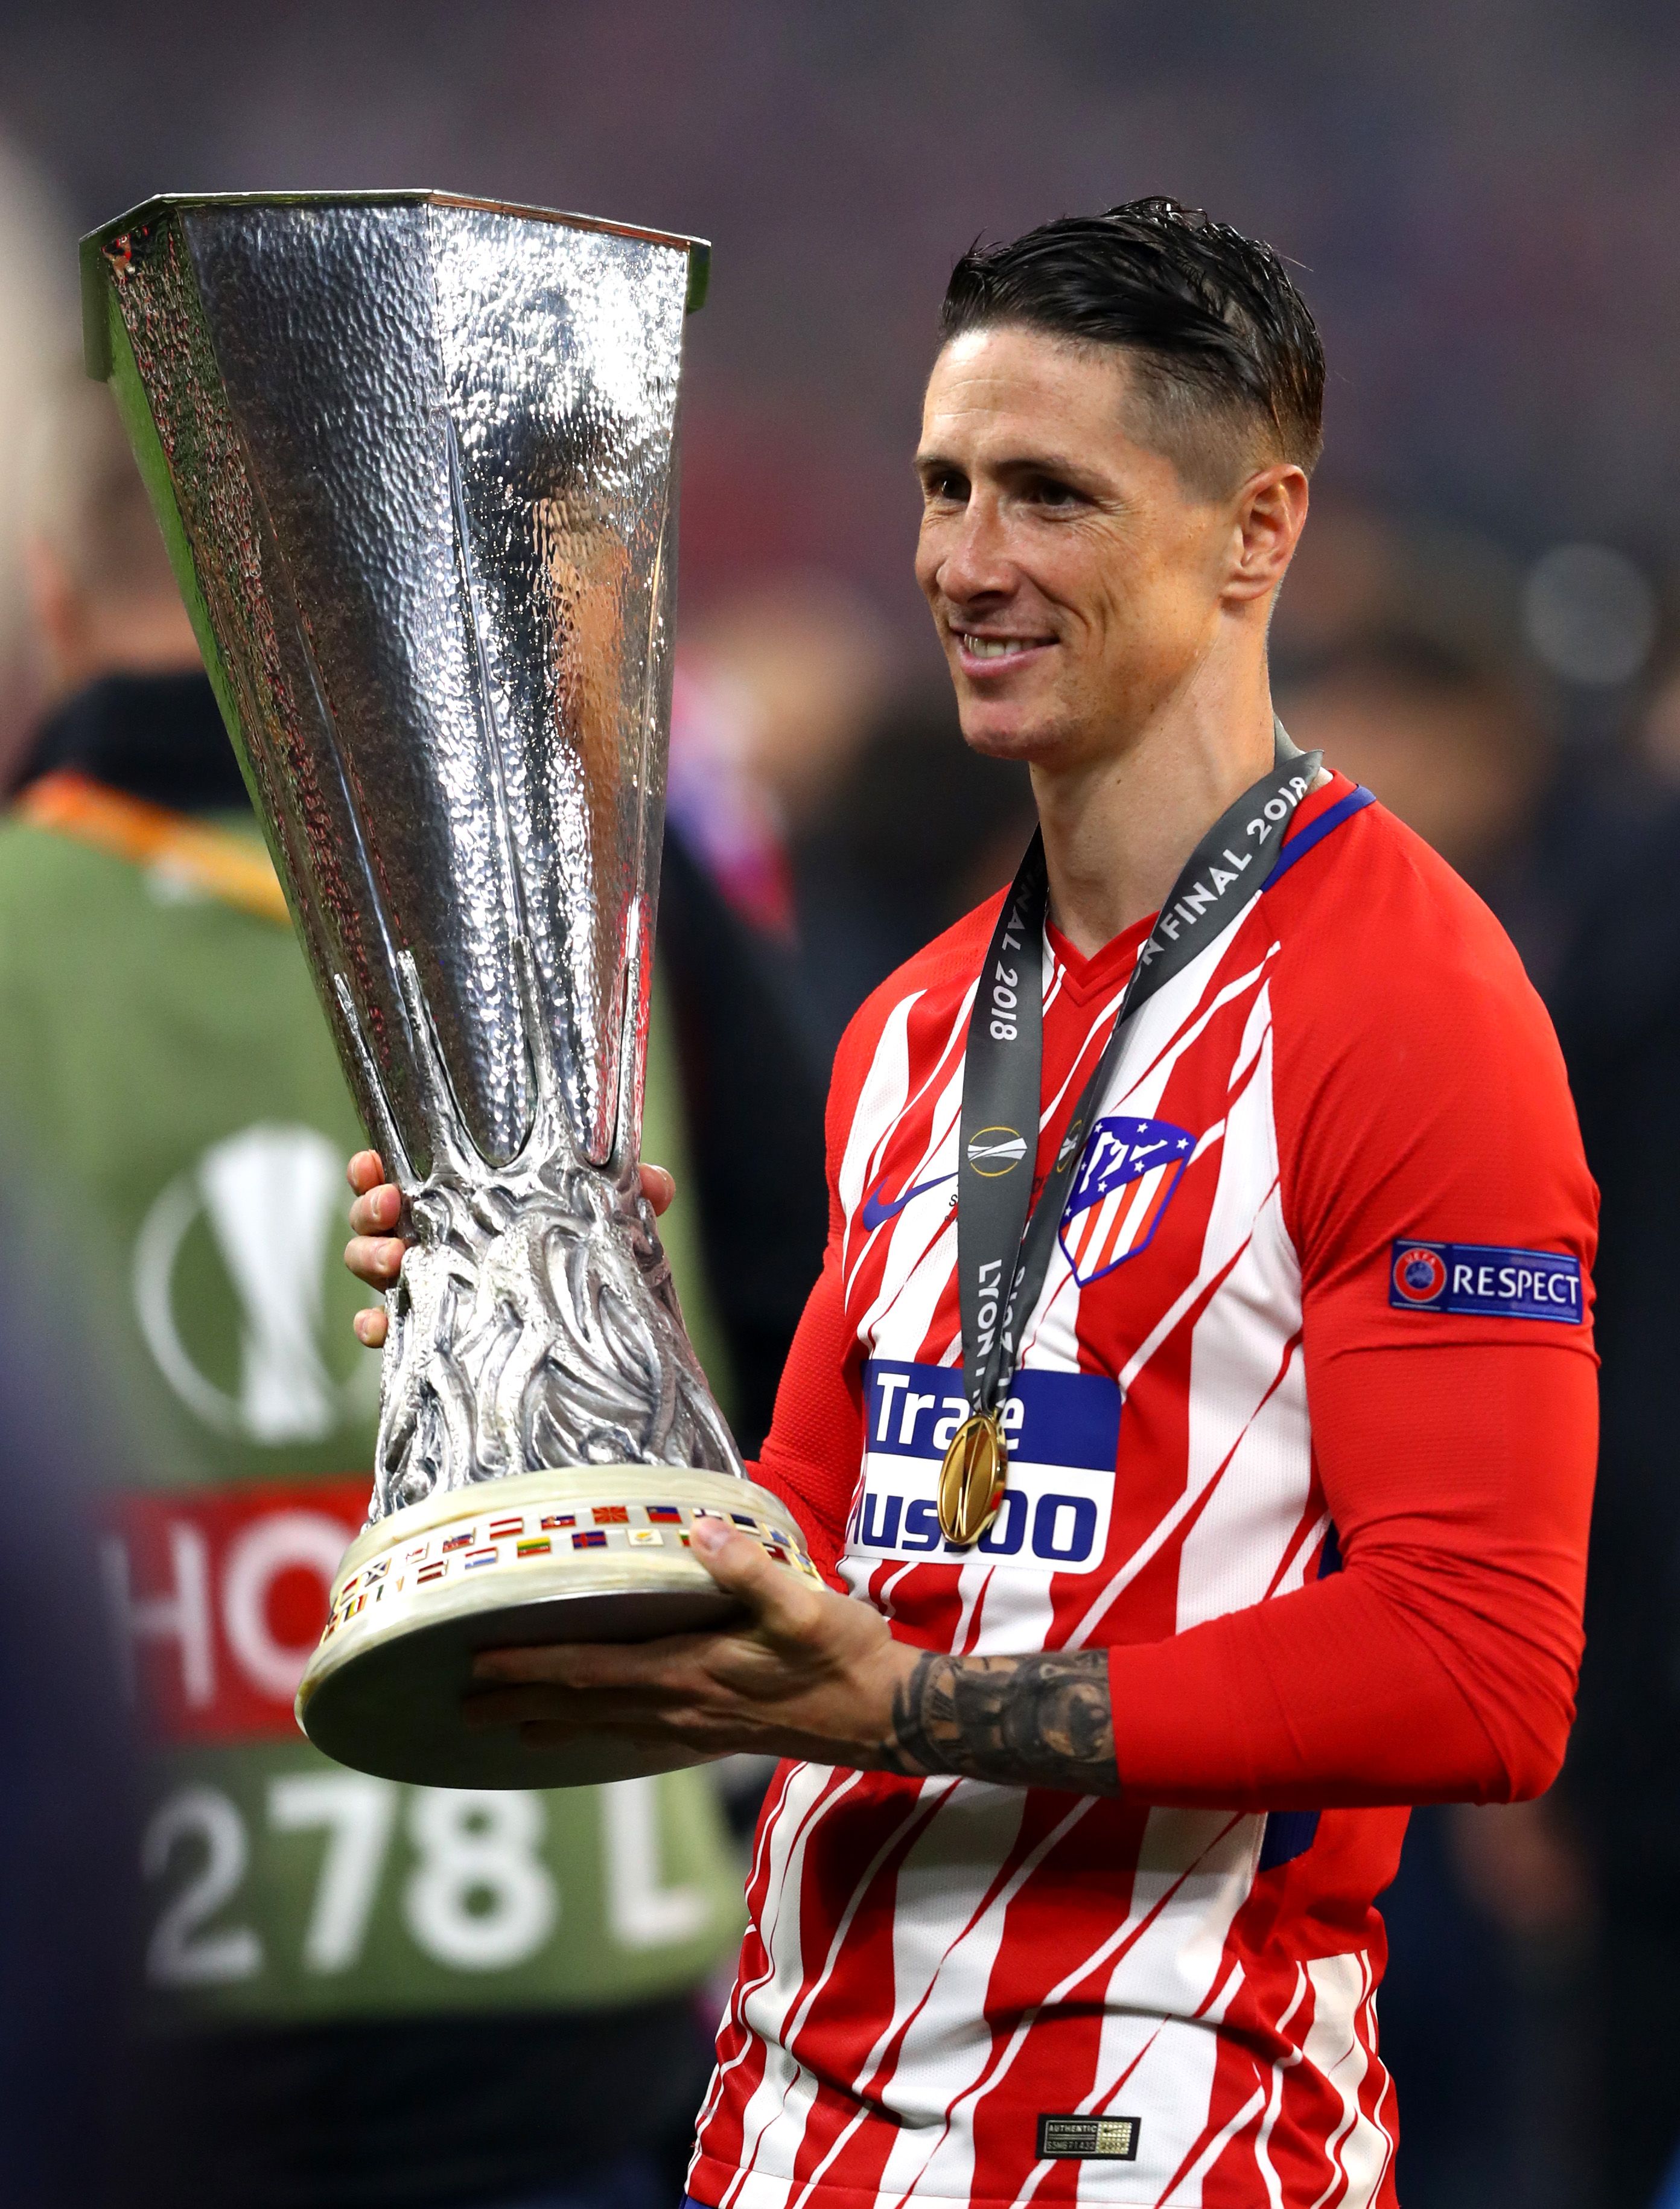 Fernando Torres poses with the Europa League trophy